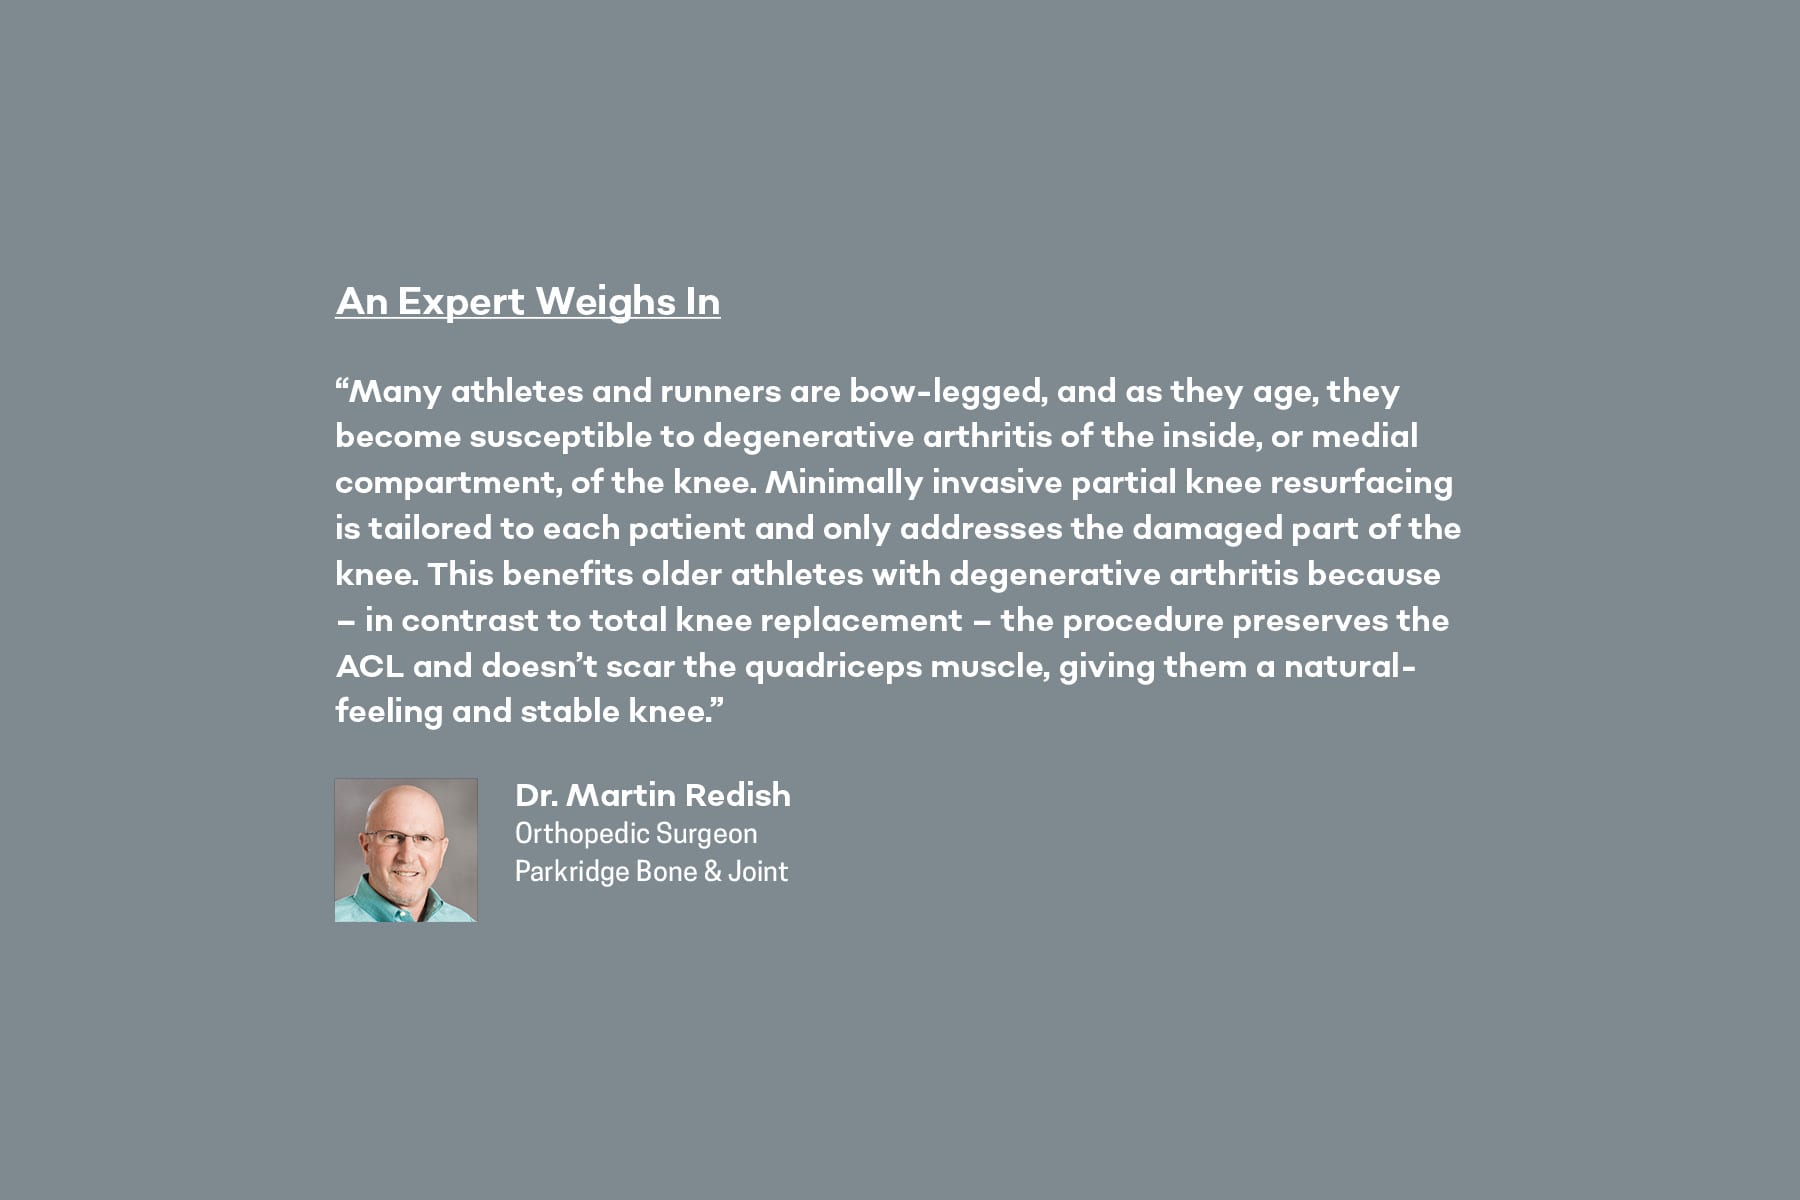 Dr. Martin Redish quote about partial knee resurfacing